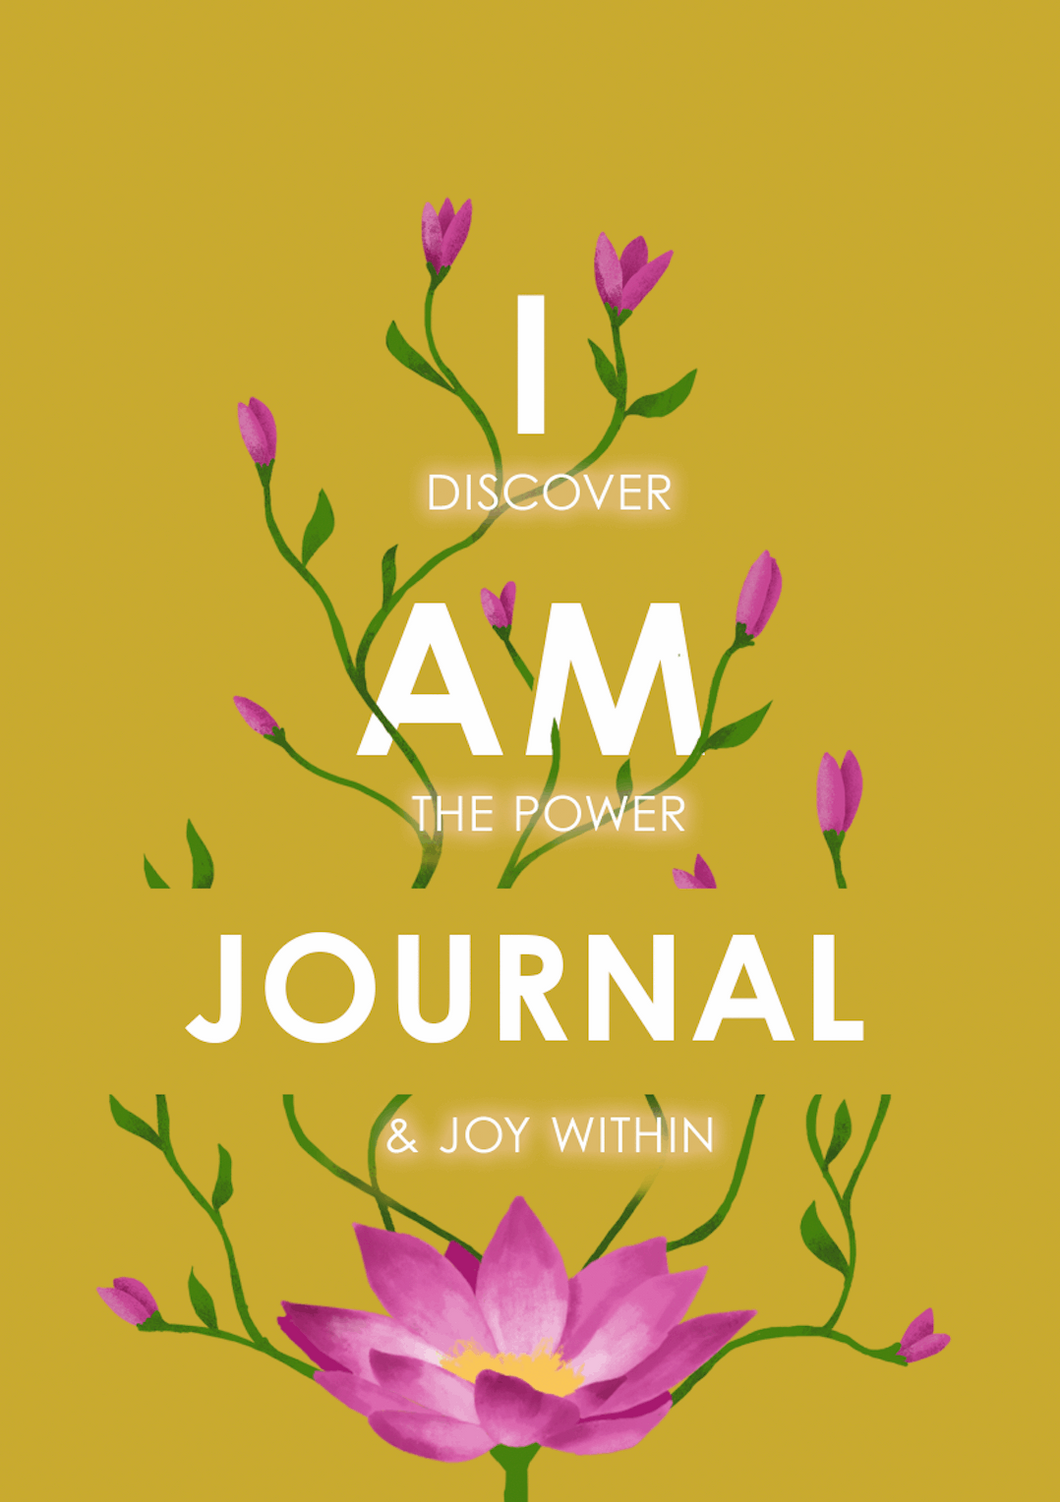 The I AM Journal :  Discover the Power and Joy within - PRE SALE ONLY